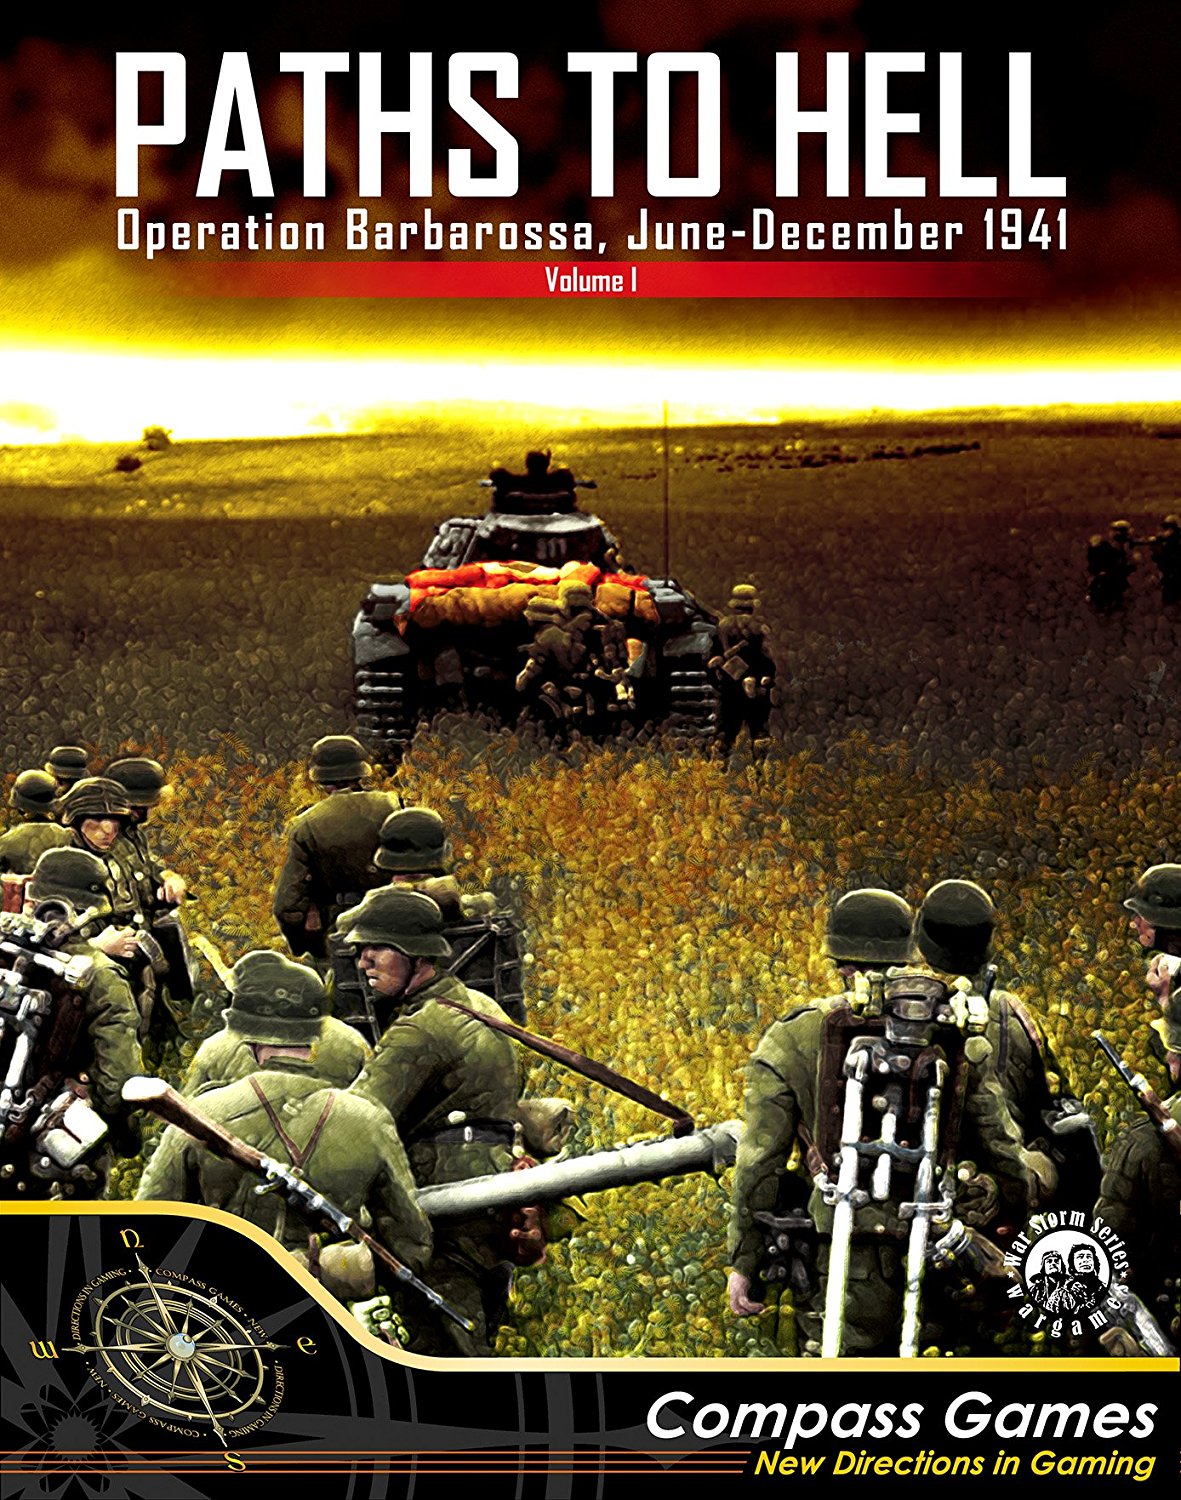 Compass Games Paths To Hell Operation Barbarossa, June-December 1941 Vol 1 1034